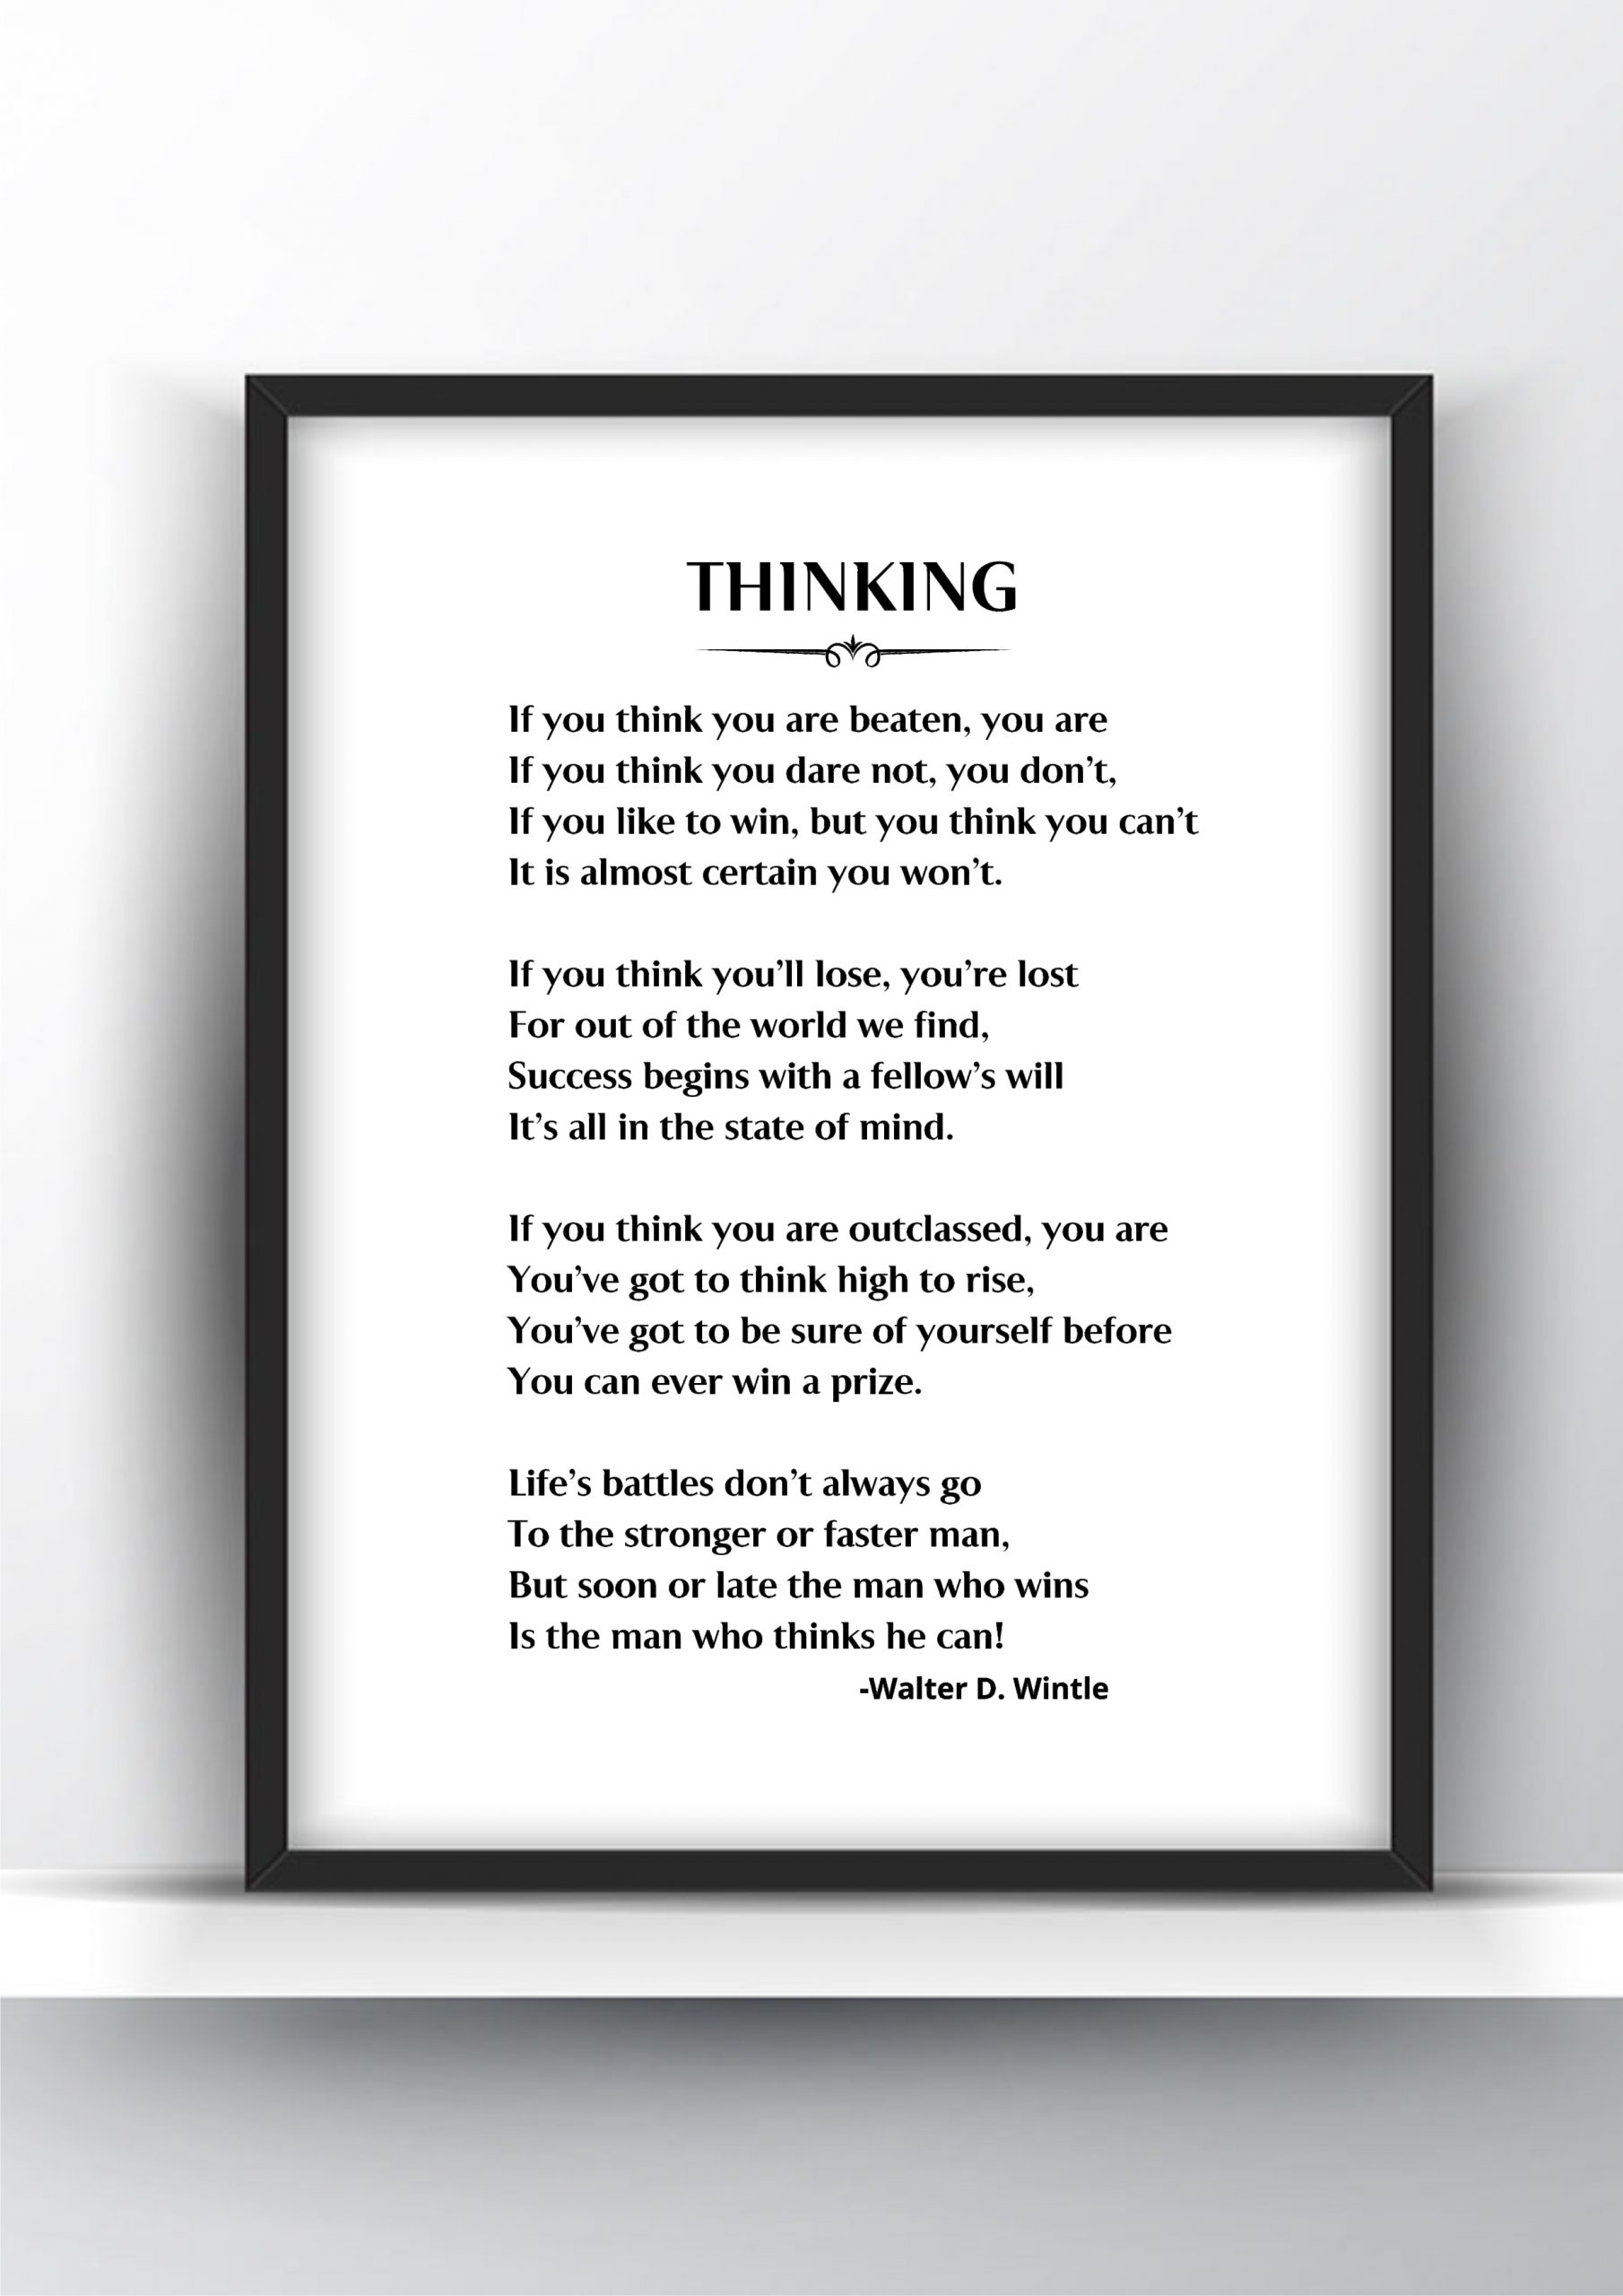 critical thinking poems